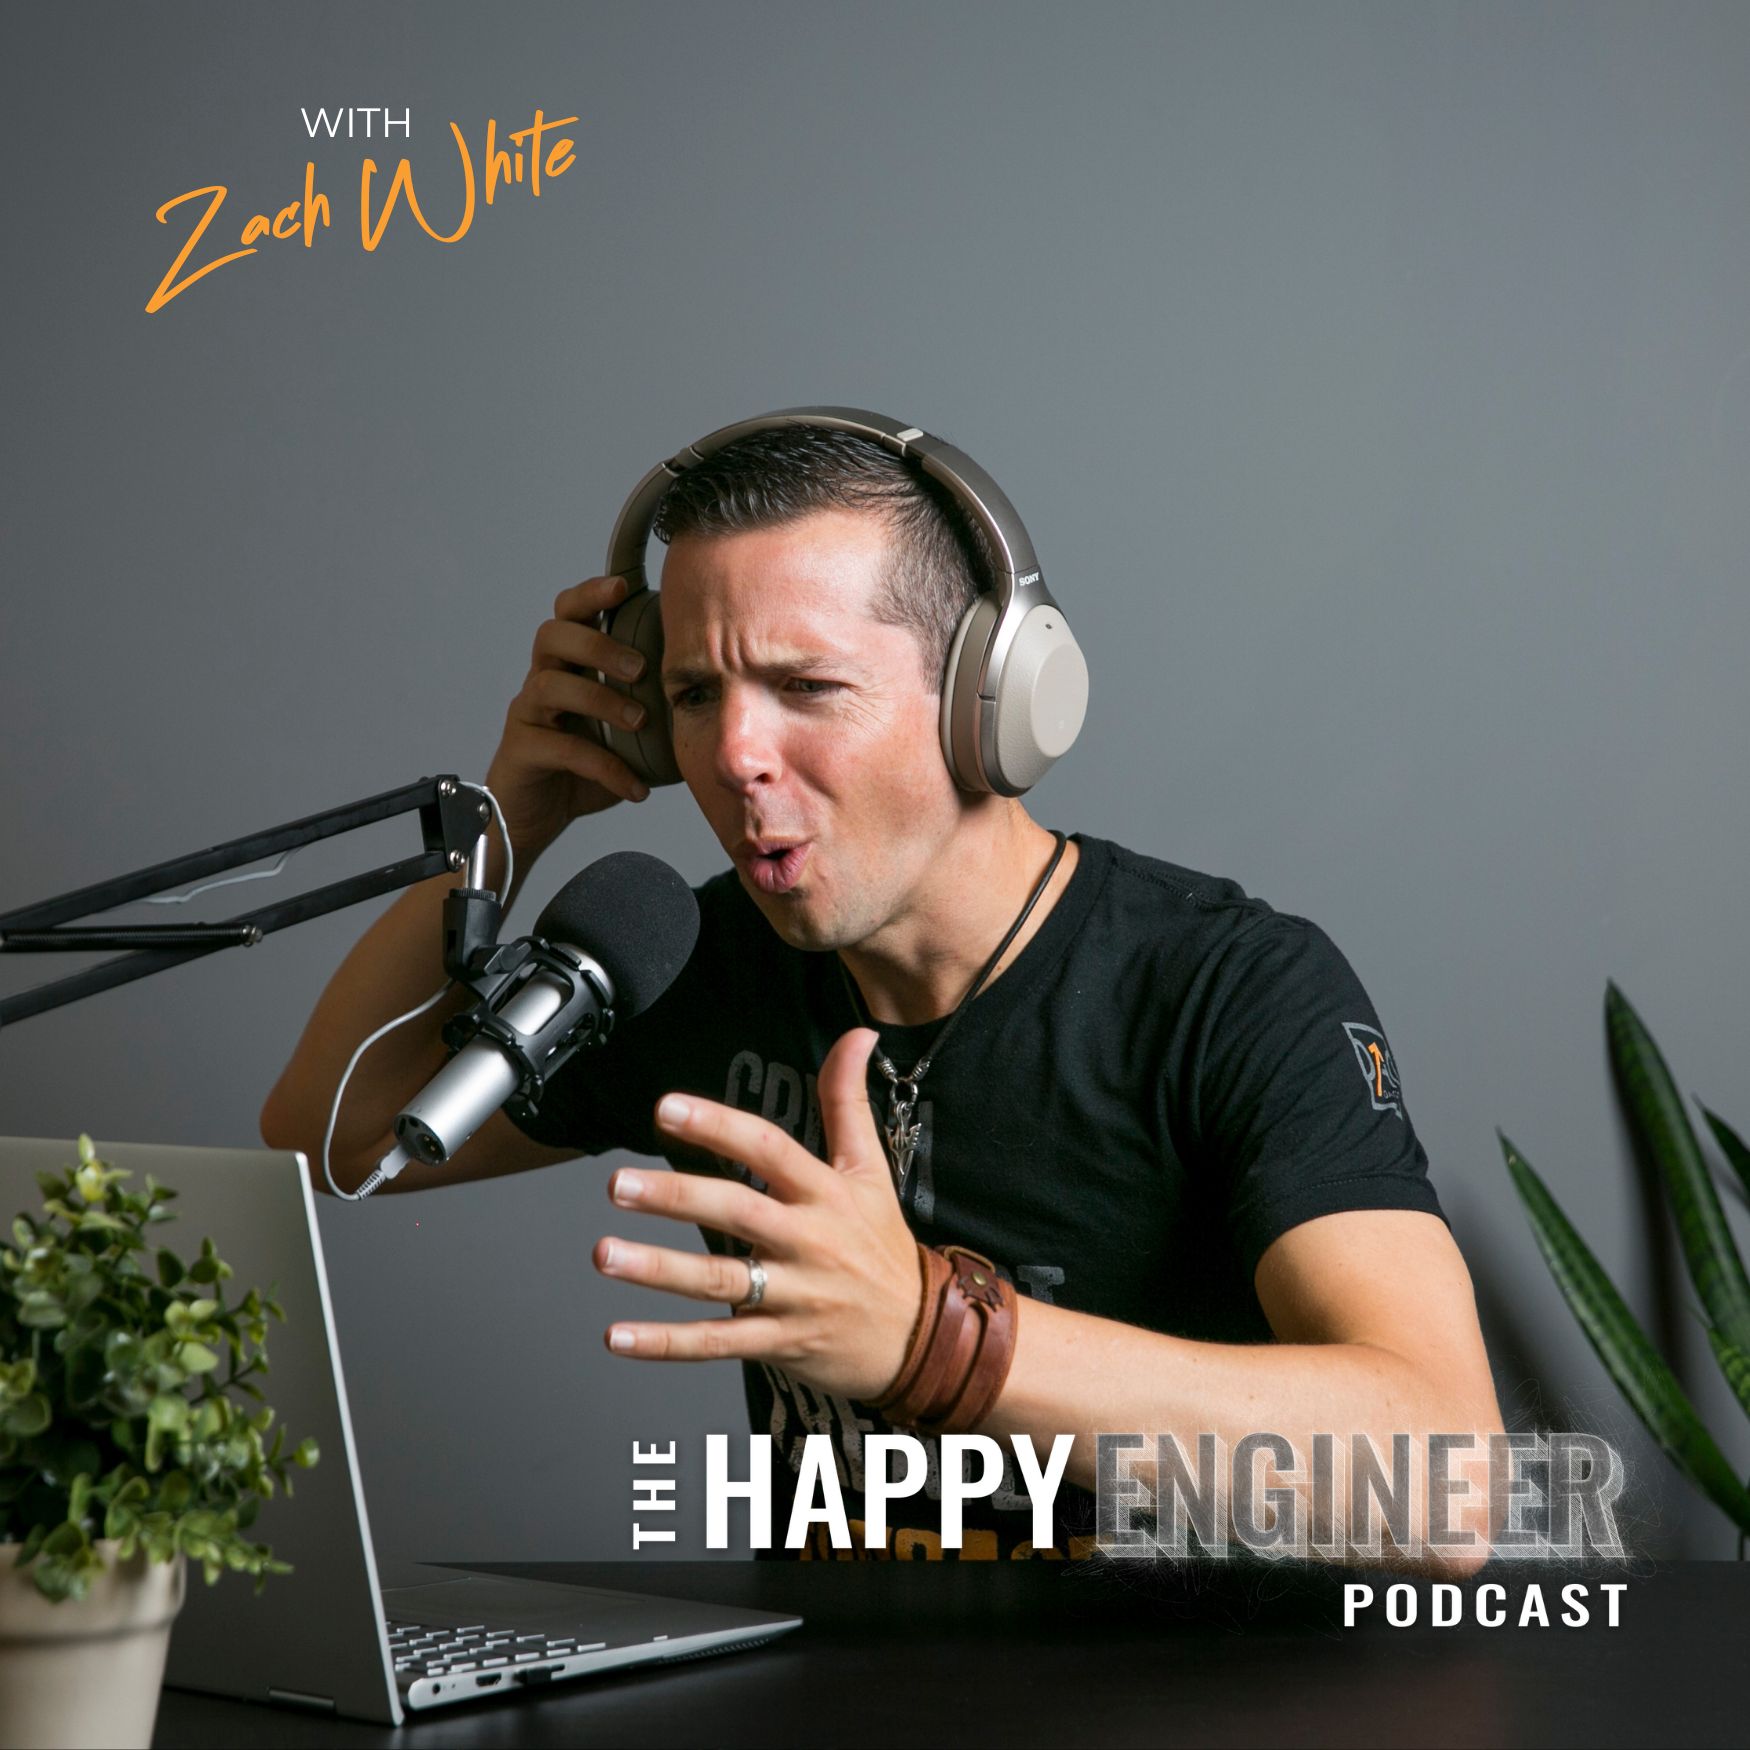 Happy Engineer Podcast Host Zach White share The Playbook Yearly Rhythm